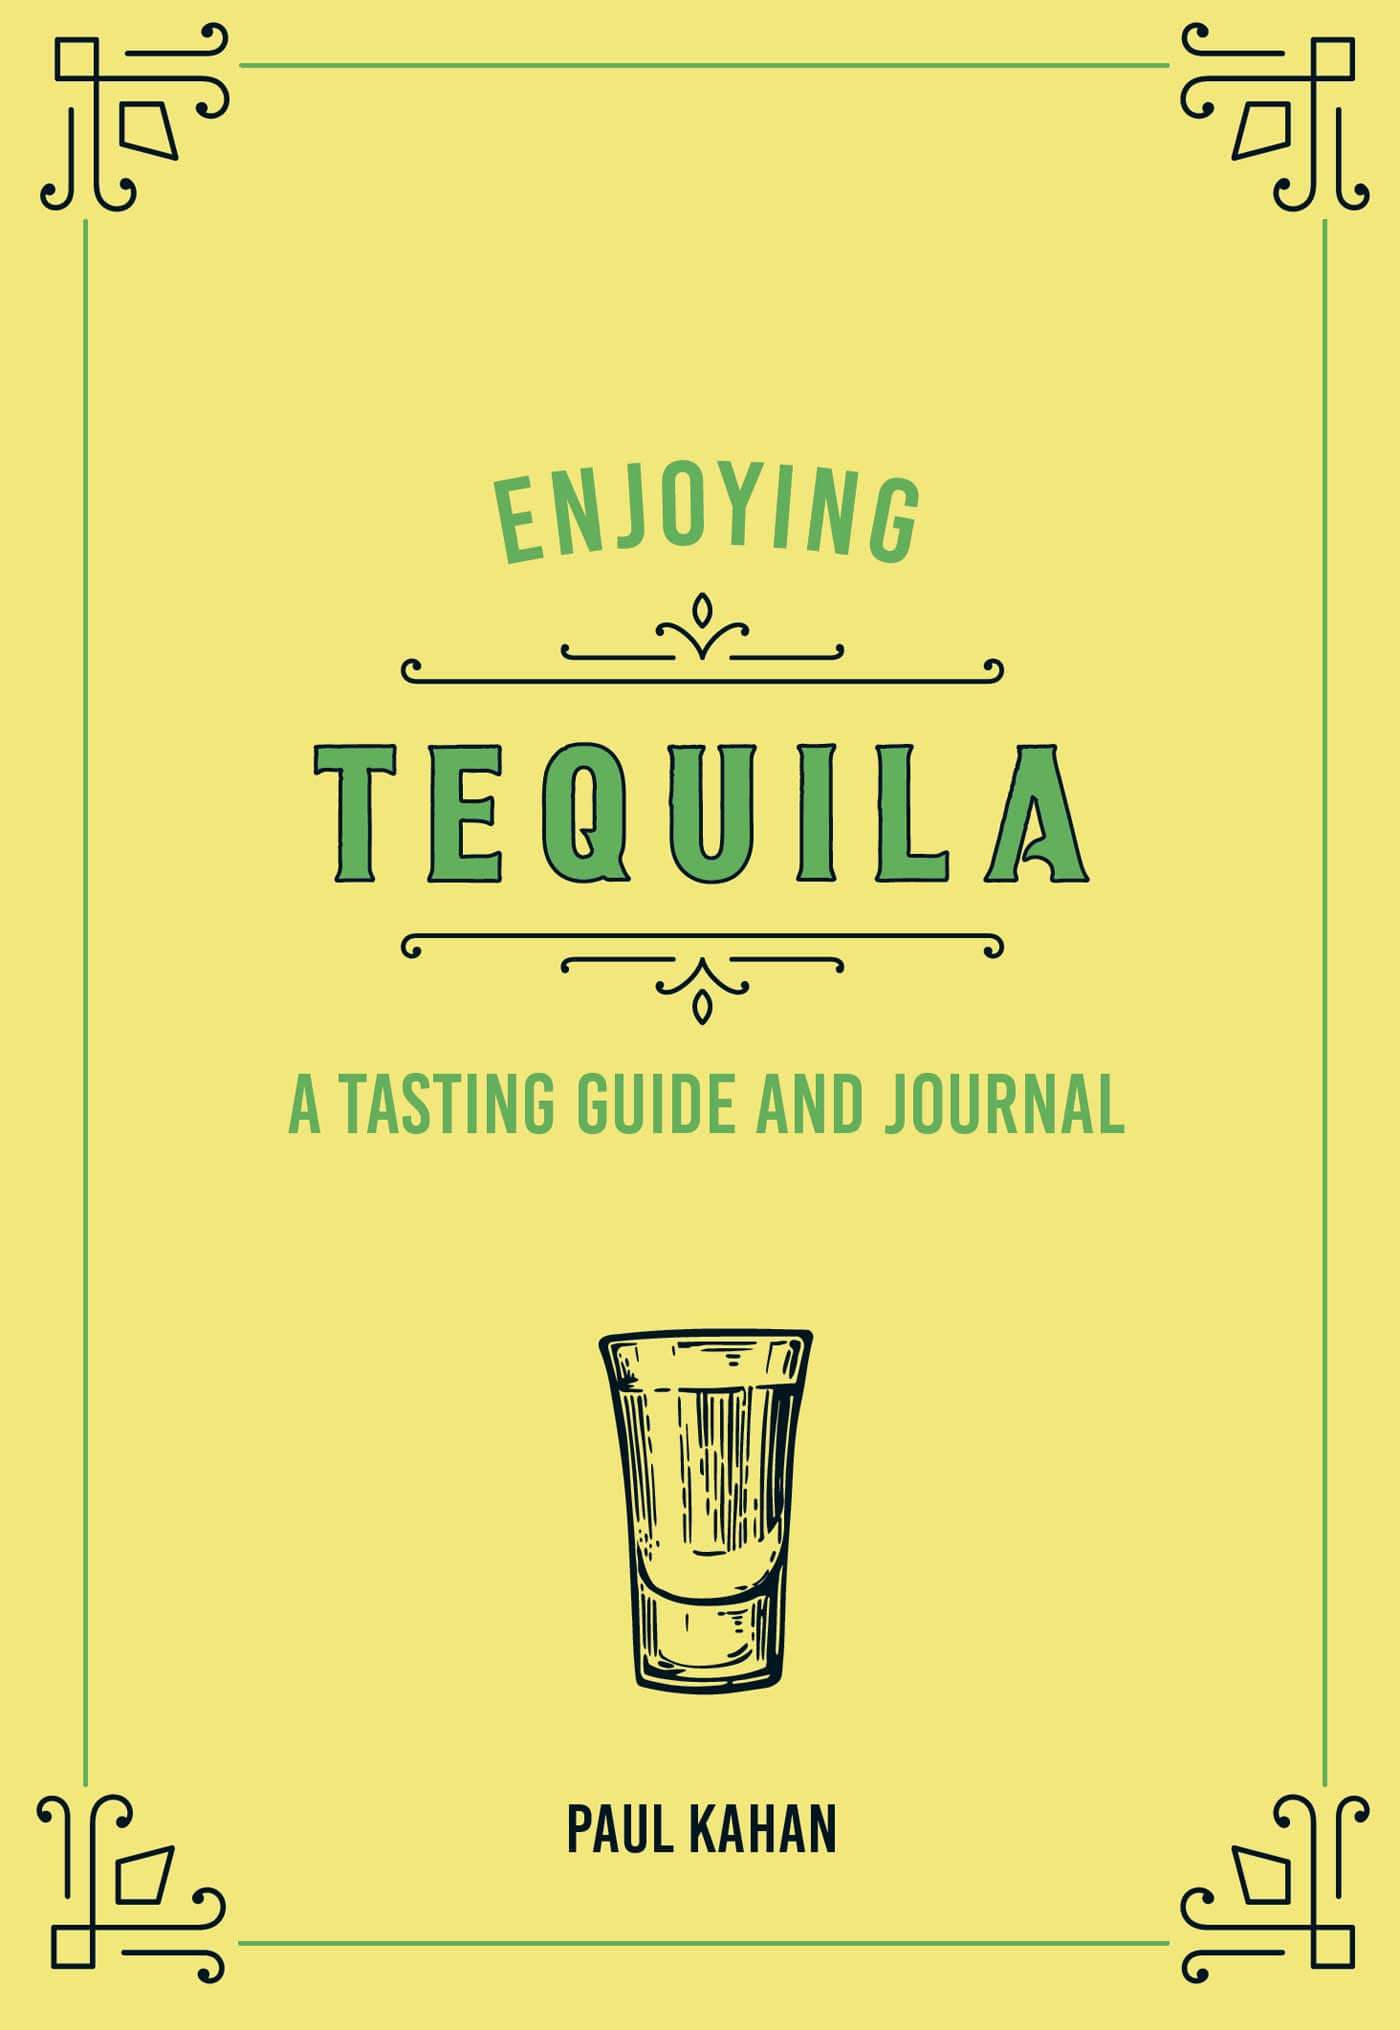 ENJOYING TEQUILA A TASTING GUIDE AND JOURNAL PAUL KAHAN - photo 1